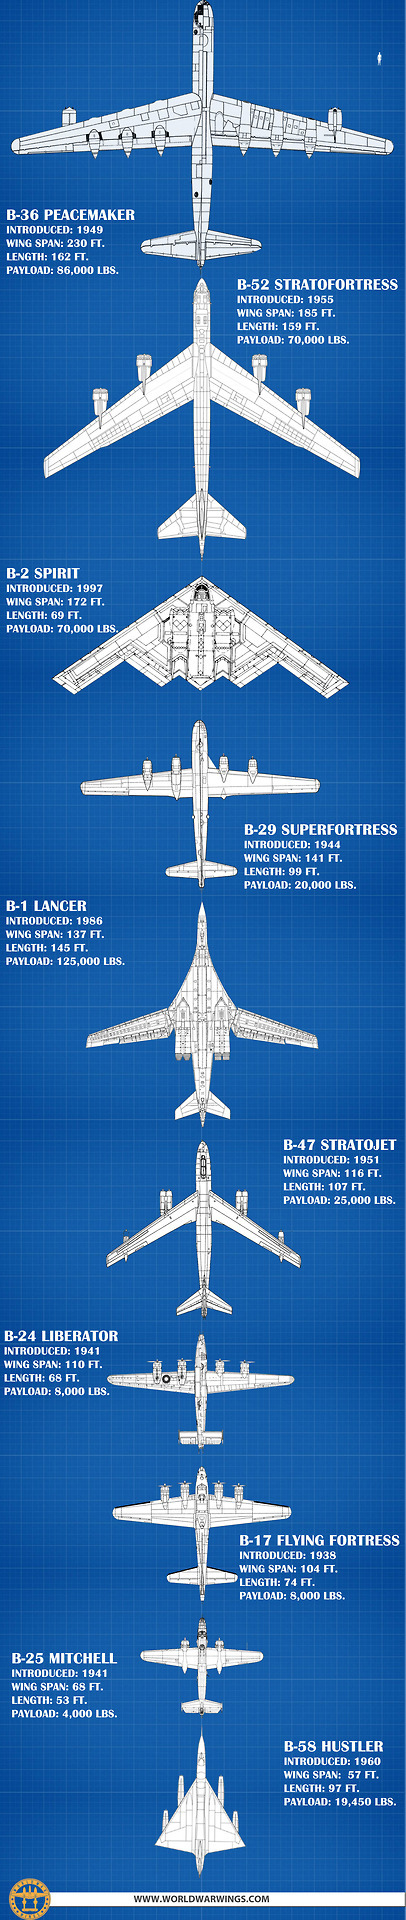 This Infographic Comparing Bomber Sizes Made Our